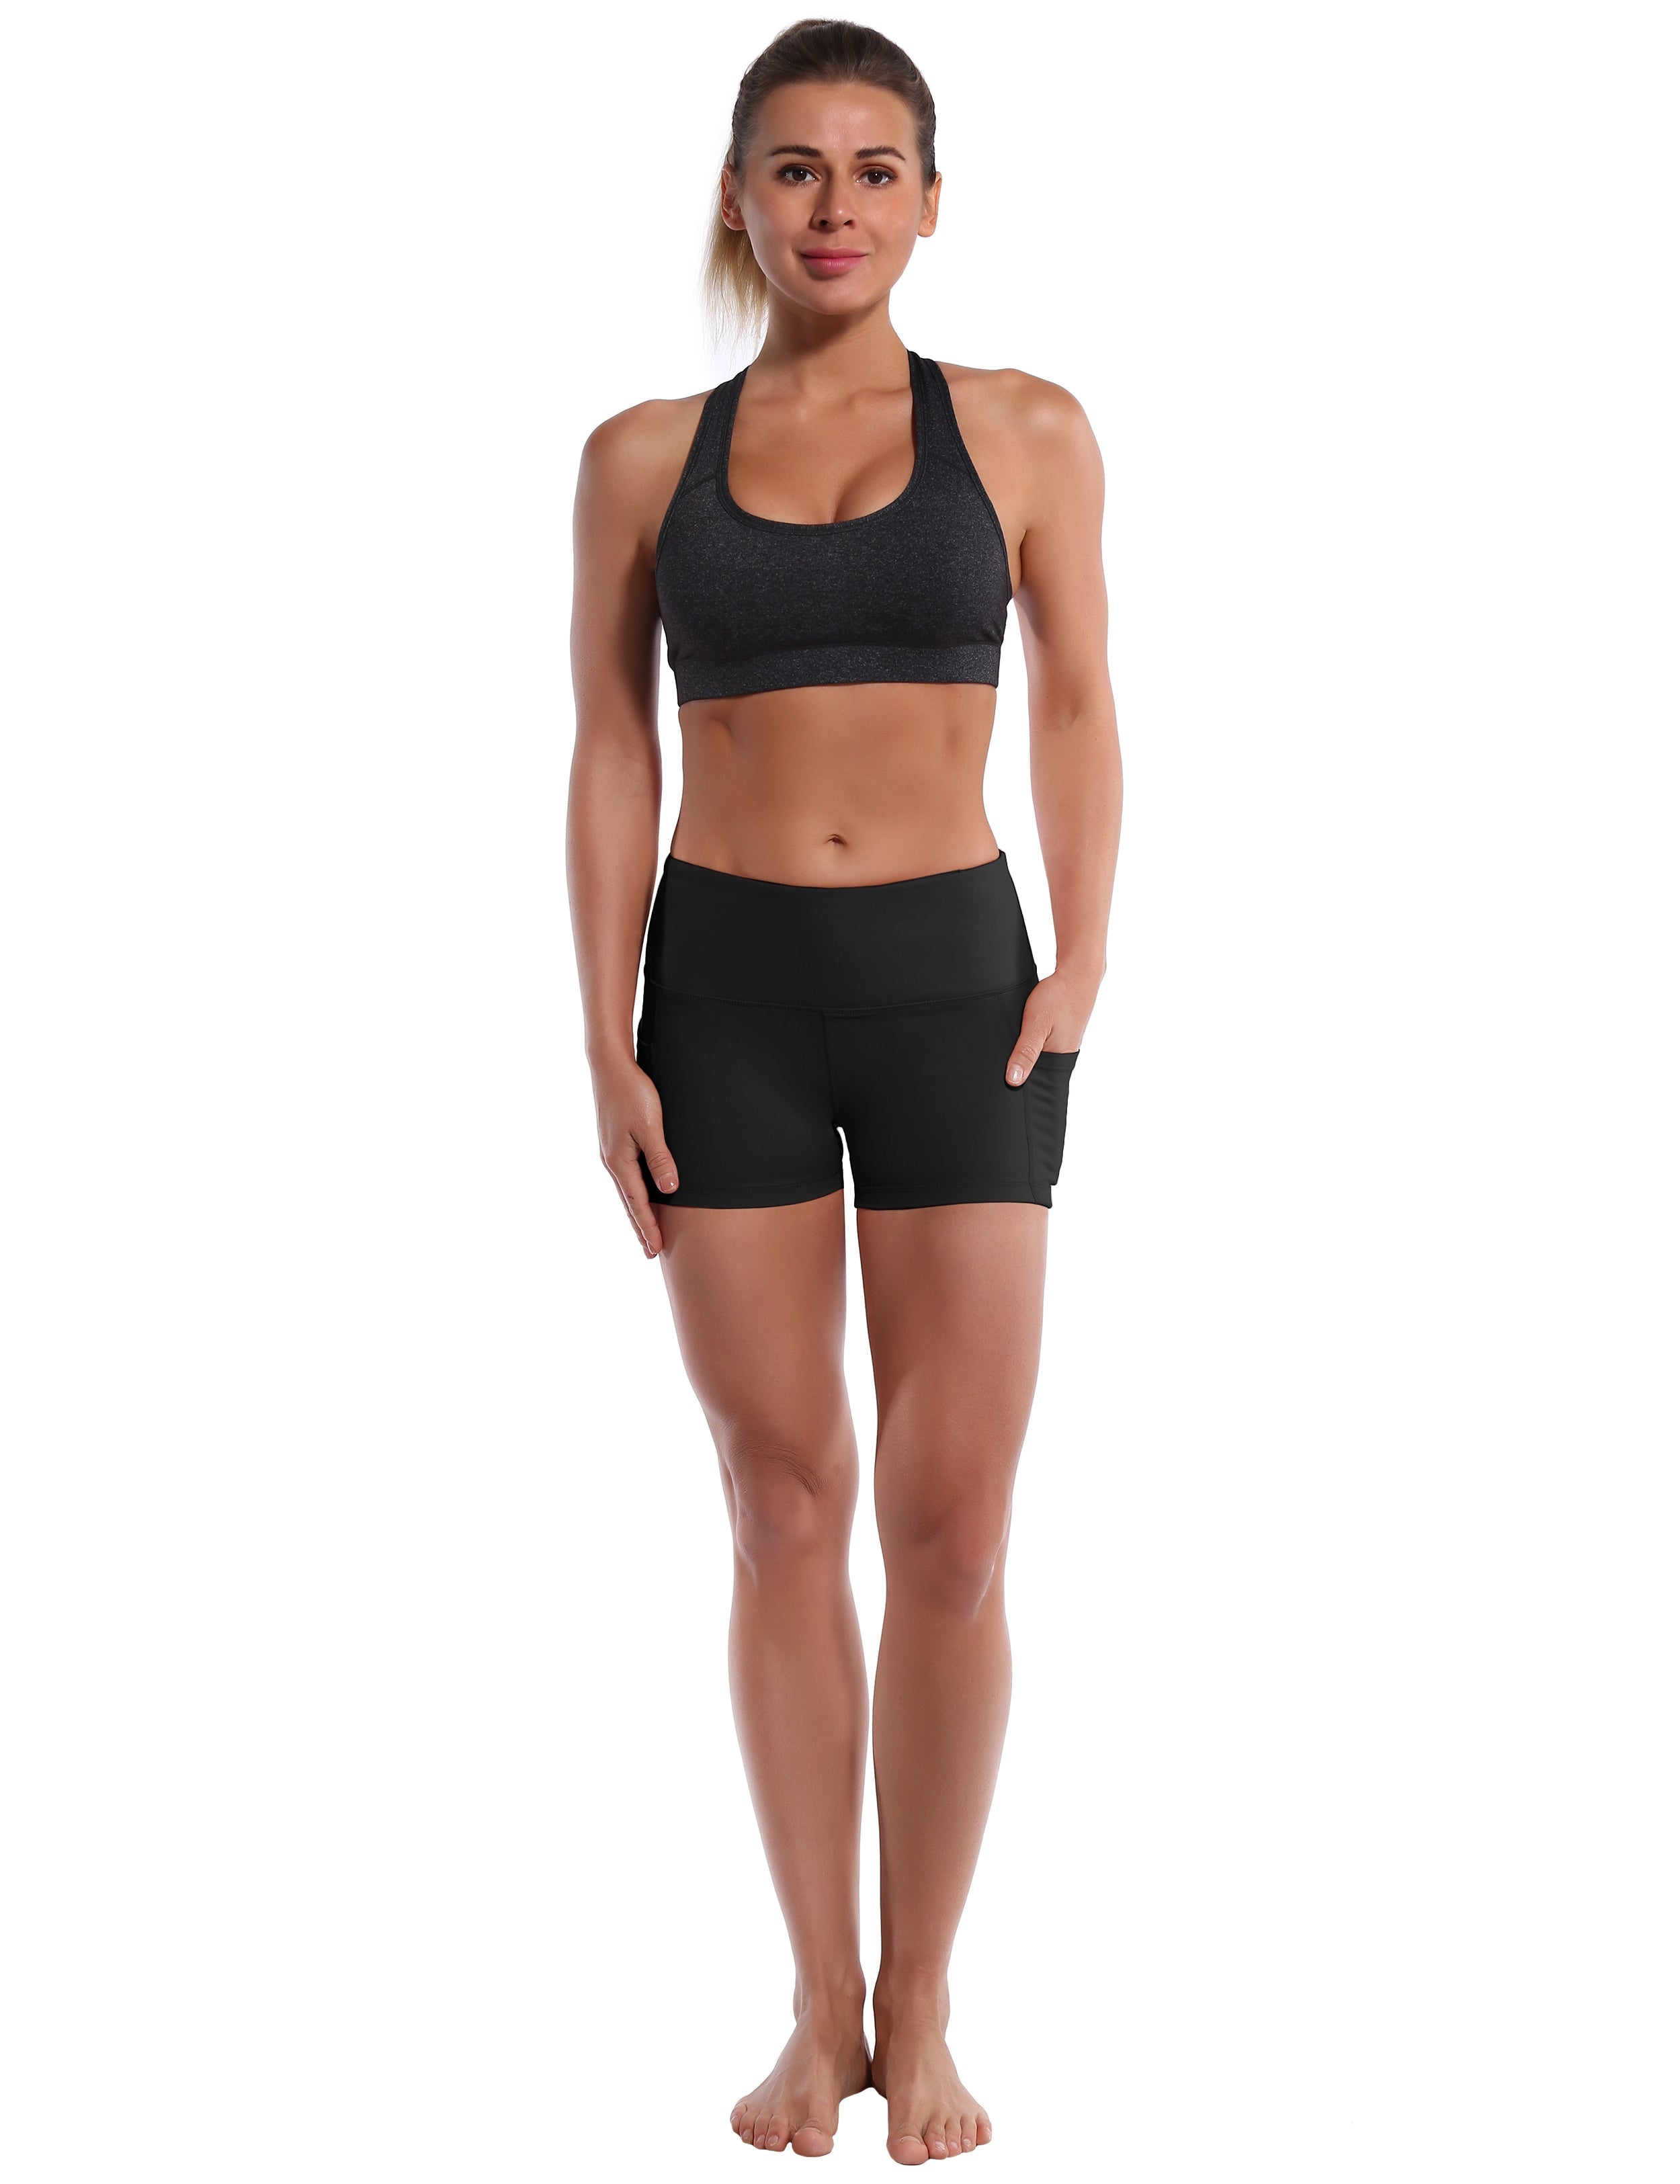 2.5" Side Pockets Gym Shorts black Sleek, soft, smooth and totally comfortable: our newest sexy style is here. Softest-ever fabric High elasticity High density 4-way stretch Fabric doesn't attract lint easily No see-through Moisture-wicking Machine wash 78% Polyester, 22% Spandex